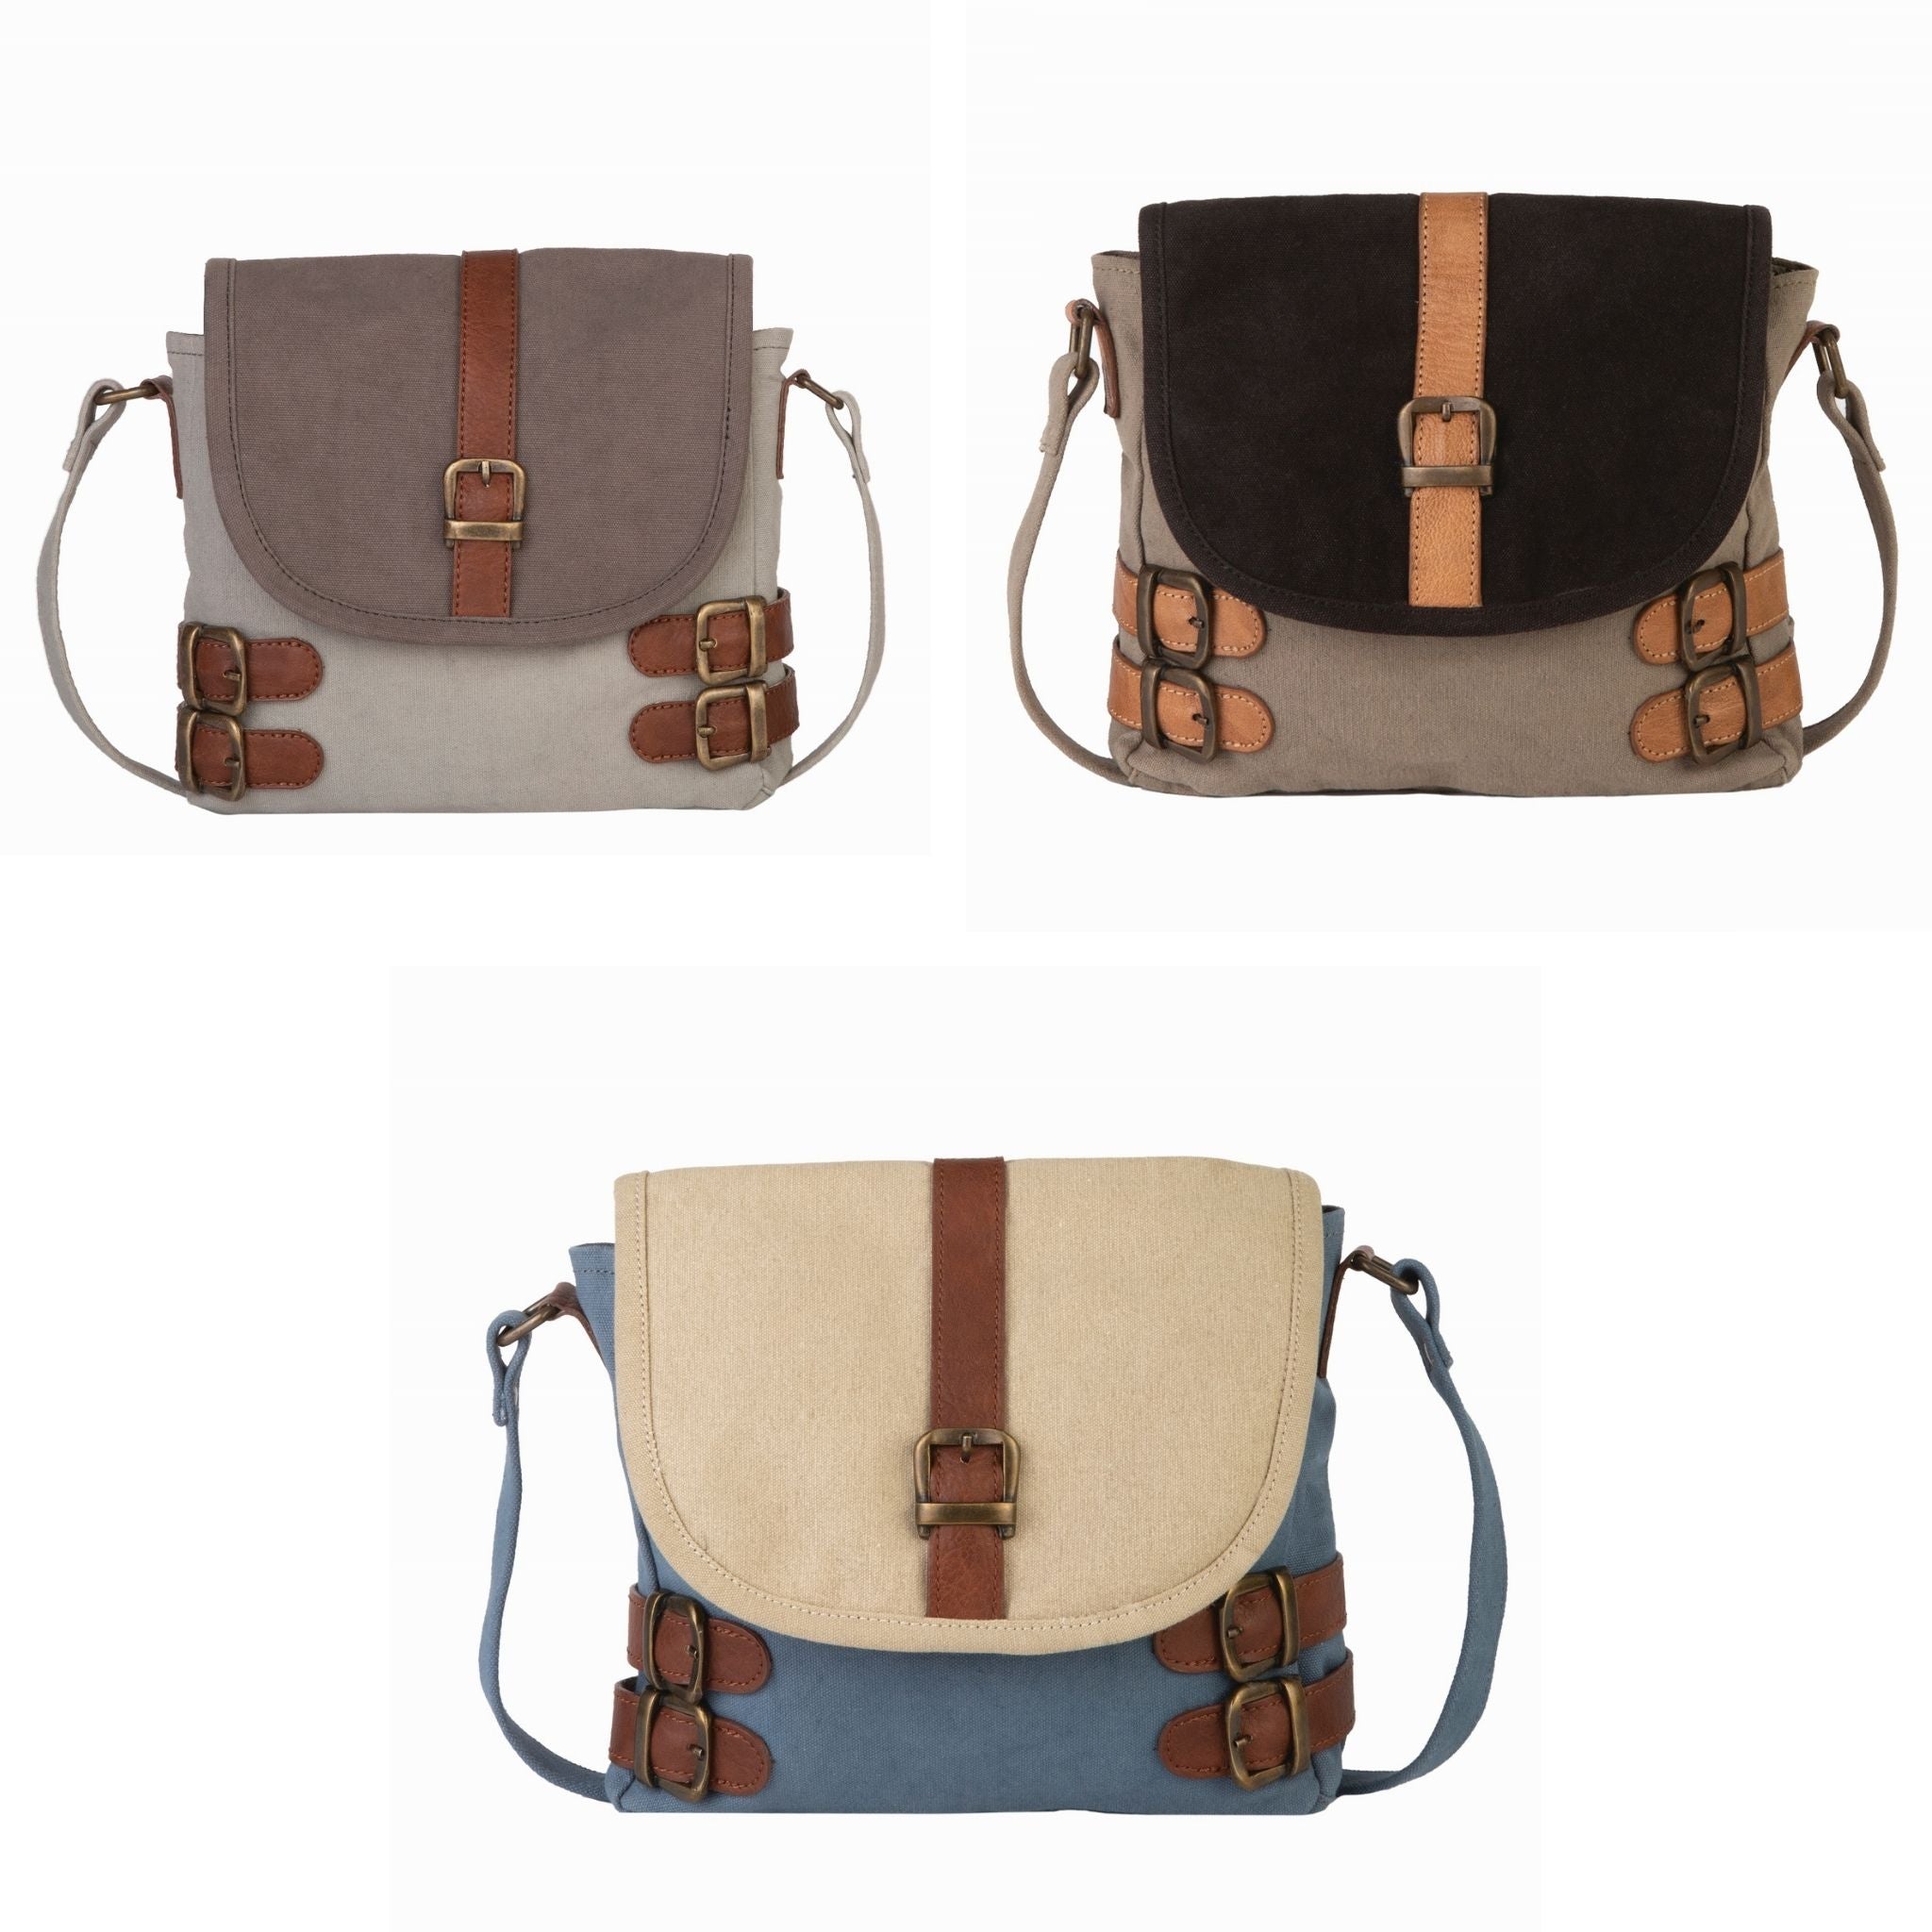 Mona B. Ava Up-Cycled and Re-cycled Canvas Cross-body Bag with Vegan Leather Trim